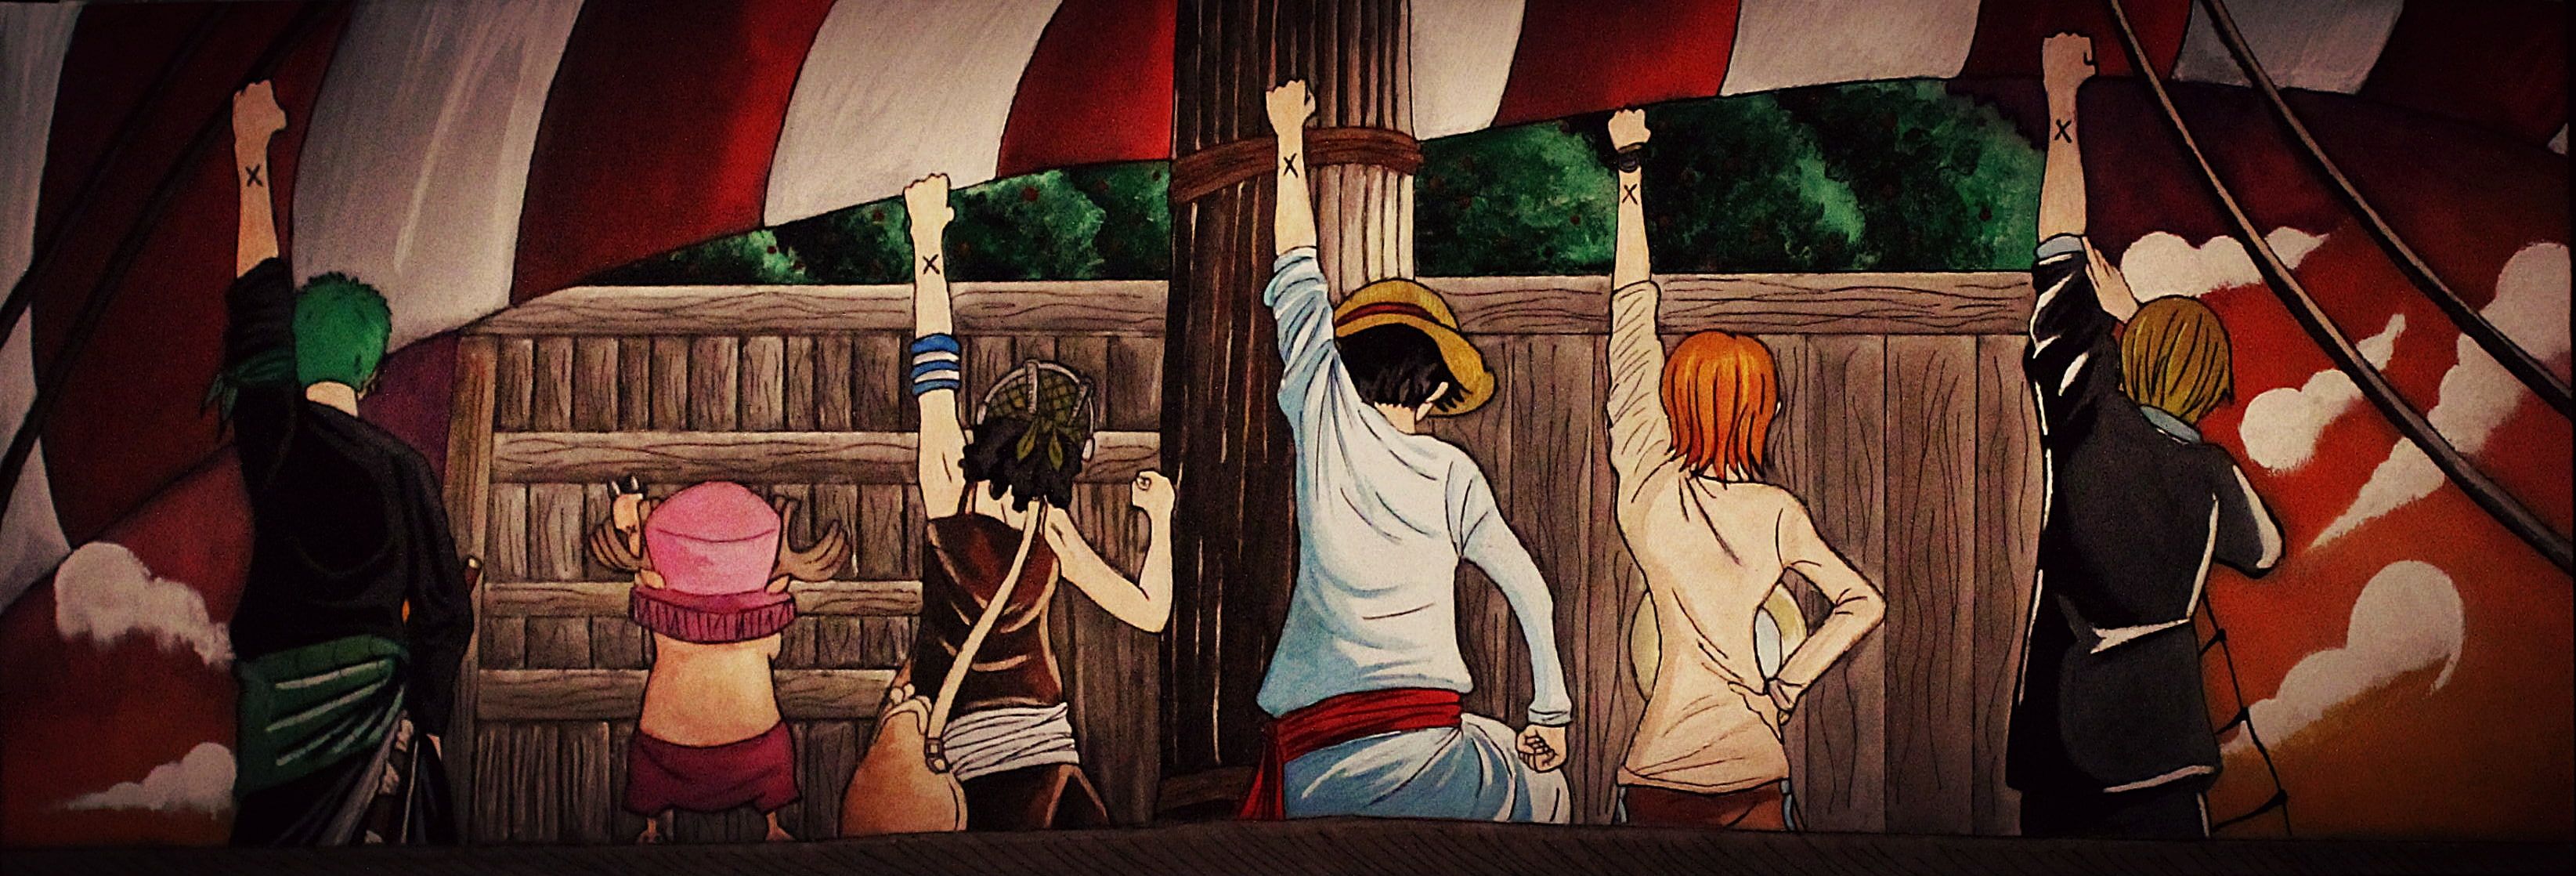 anime One Piece #back #fist arms up K #wallpaper #hdwallpaper #desktop. Wallpaper, Anime, One piece (anime)